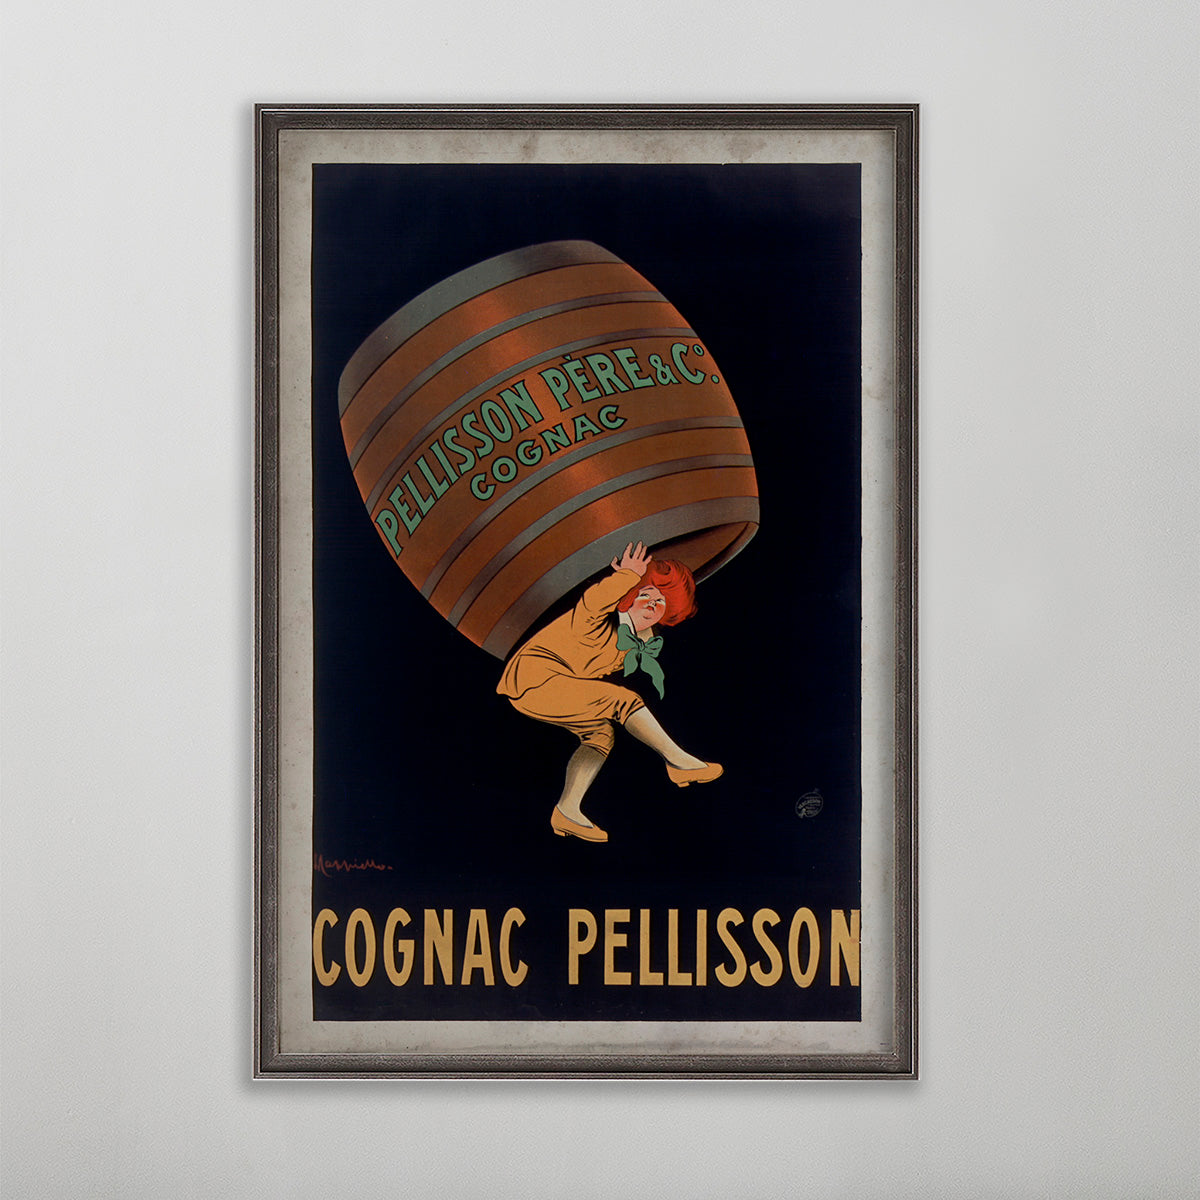 Cognac Pellison vintage poster wall art by leonetto cappiello. Boy with red hair holding barrel or keg.